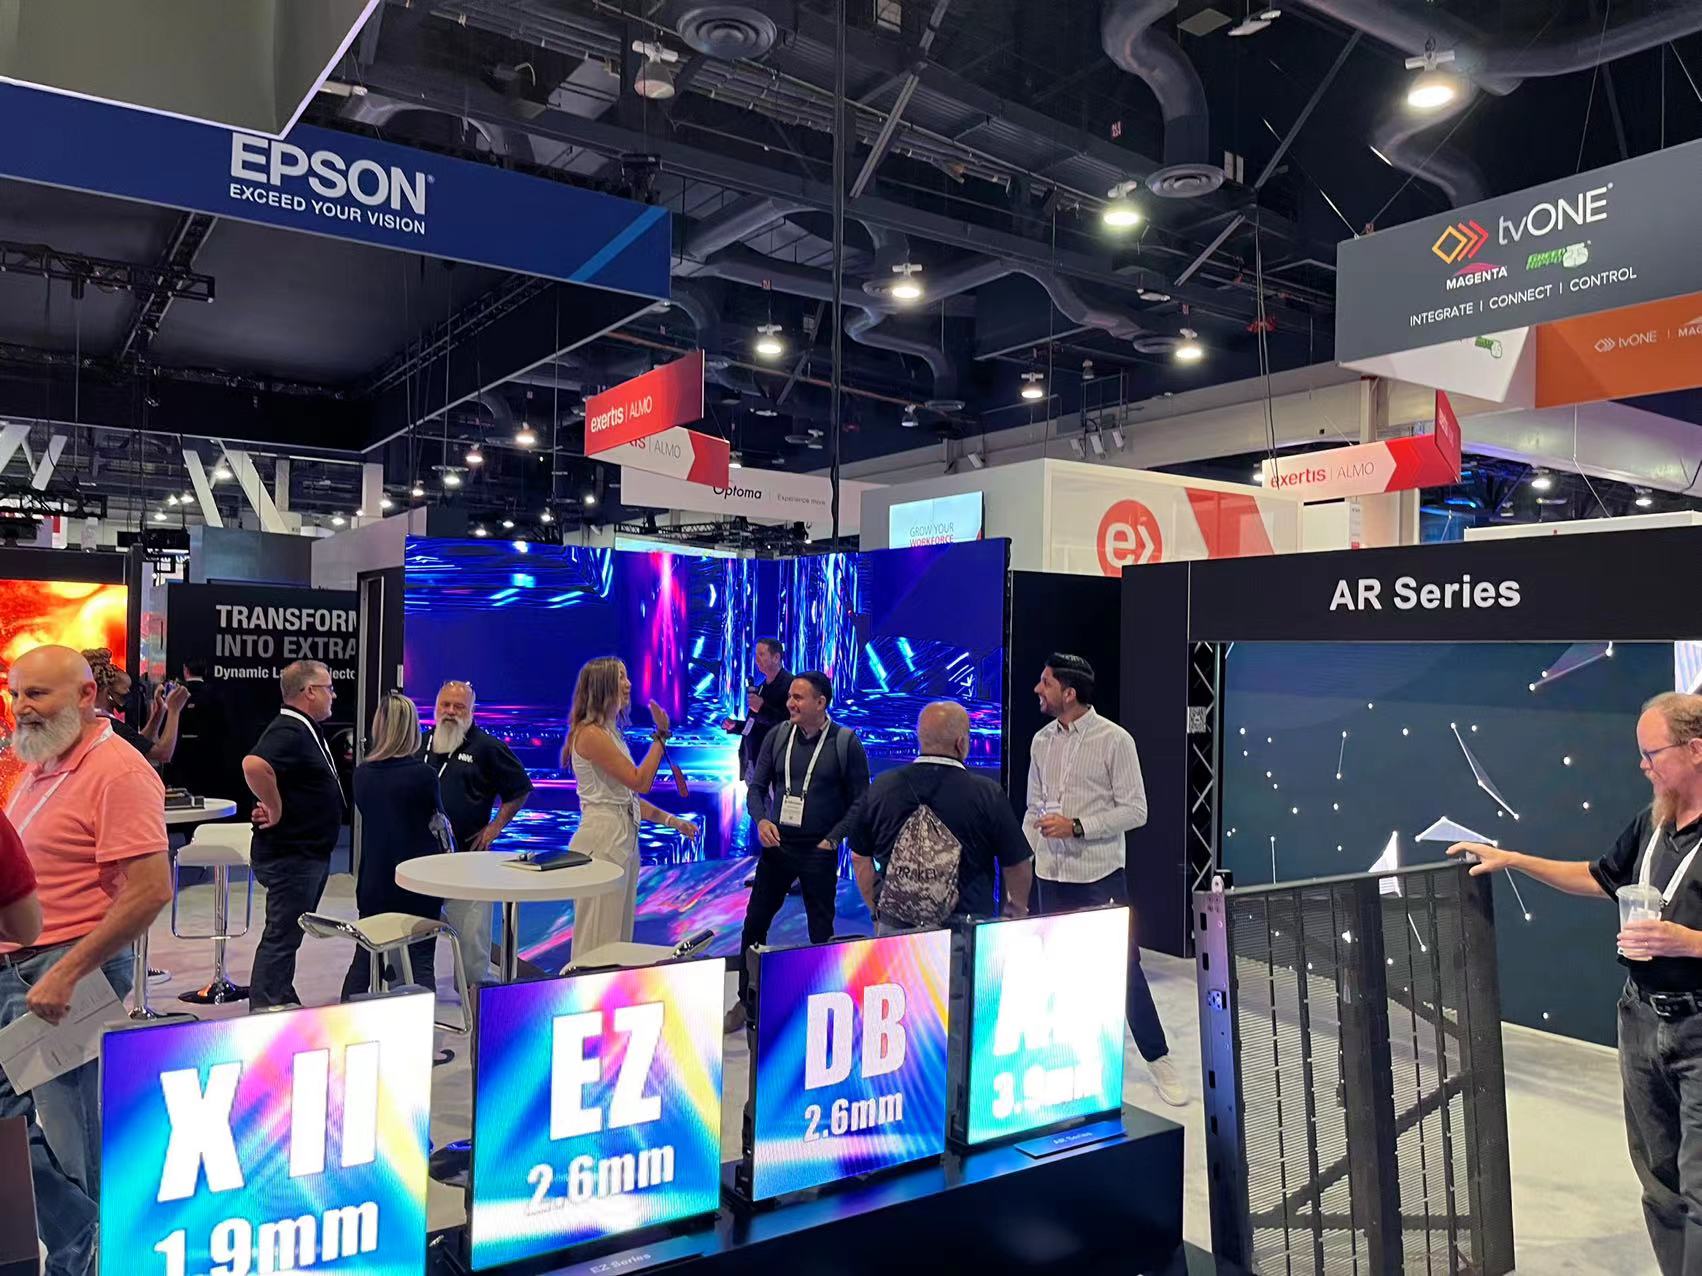 INFiLED Wows Crowds at InfoComm 2022 in Las Vegas